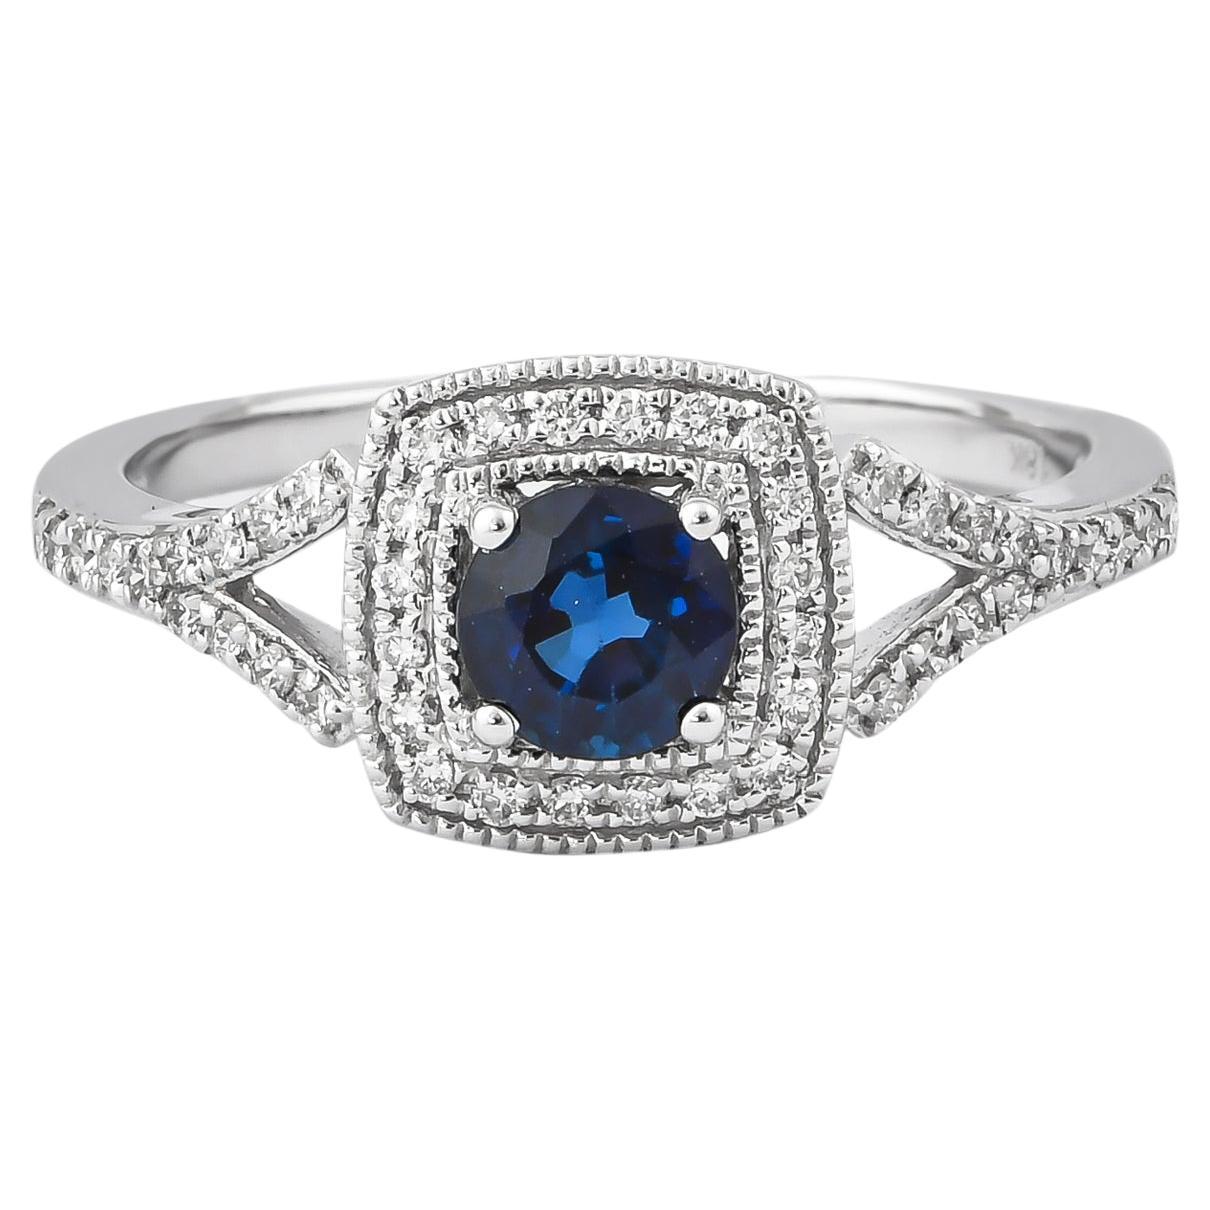 0.7 Carat Blue Sapphire and Diamond Ring in 18 Karat White Gold For Sale